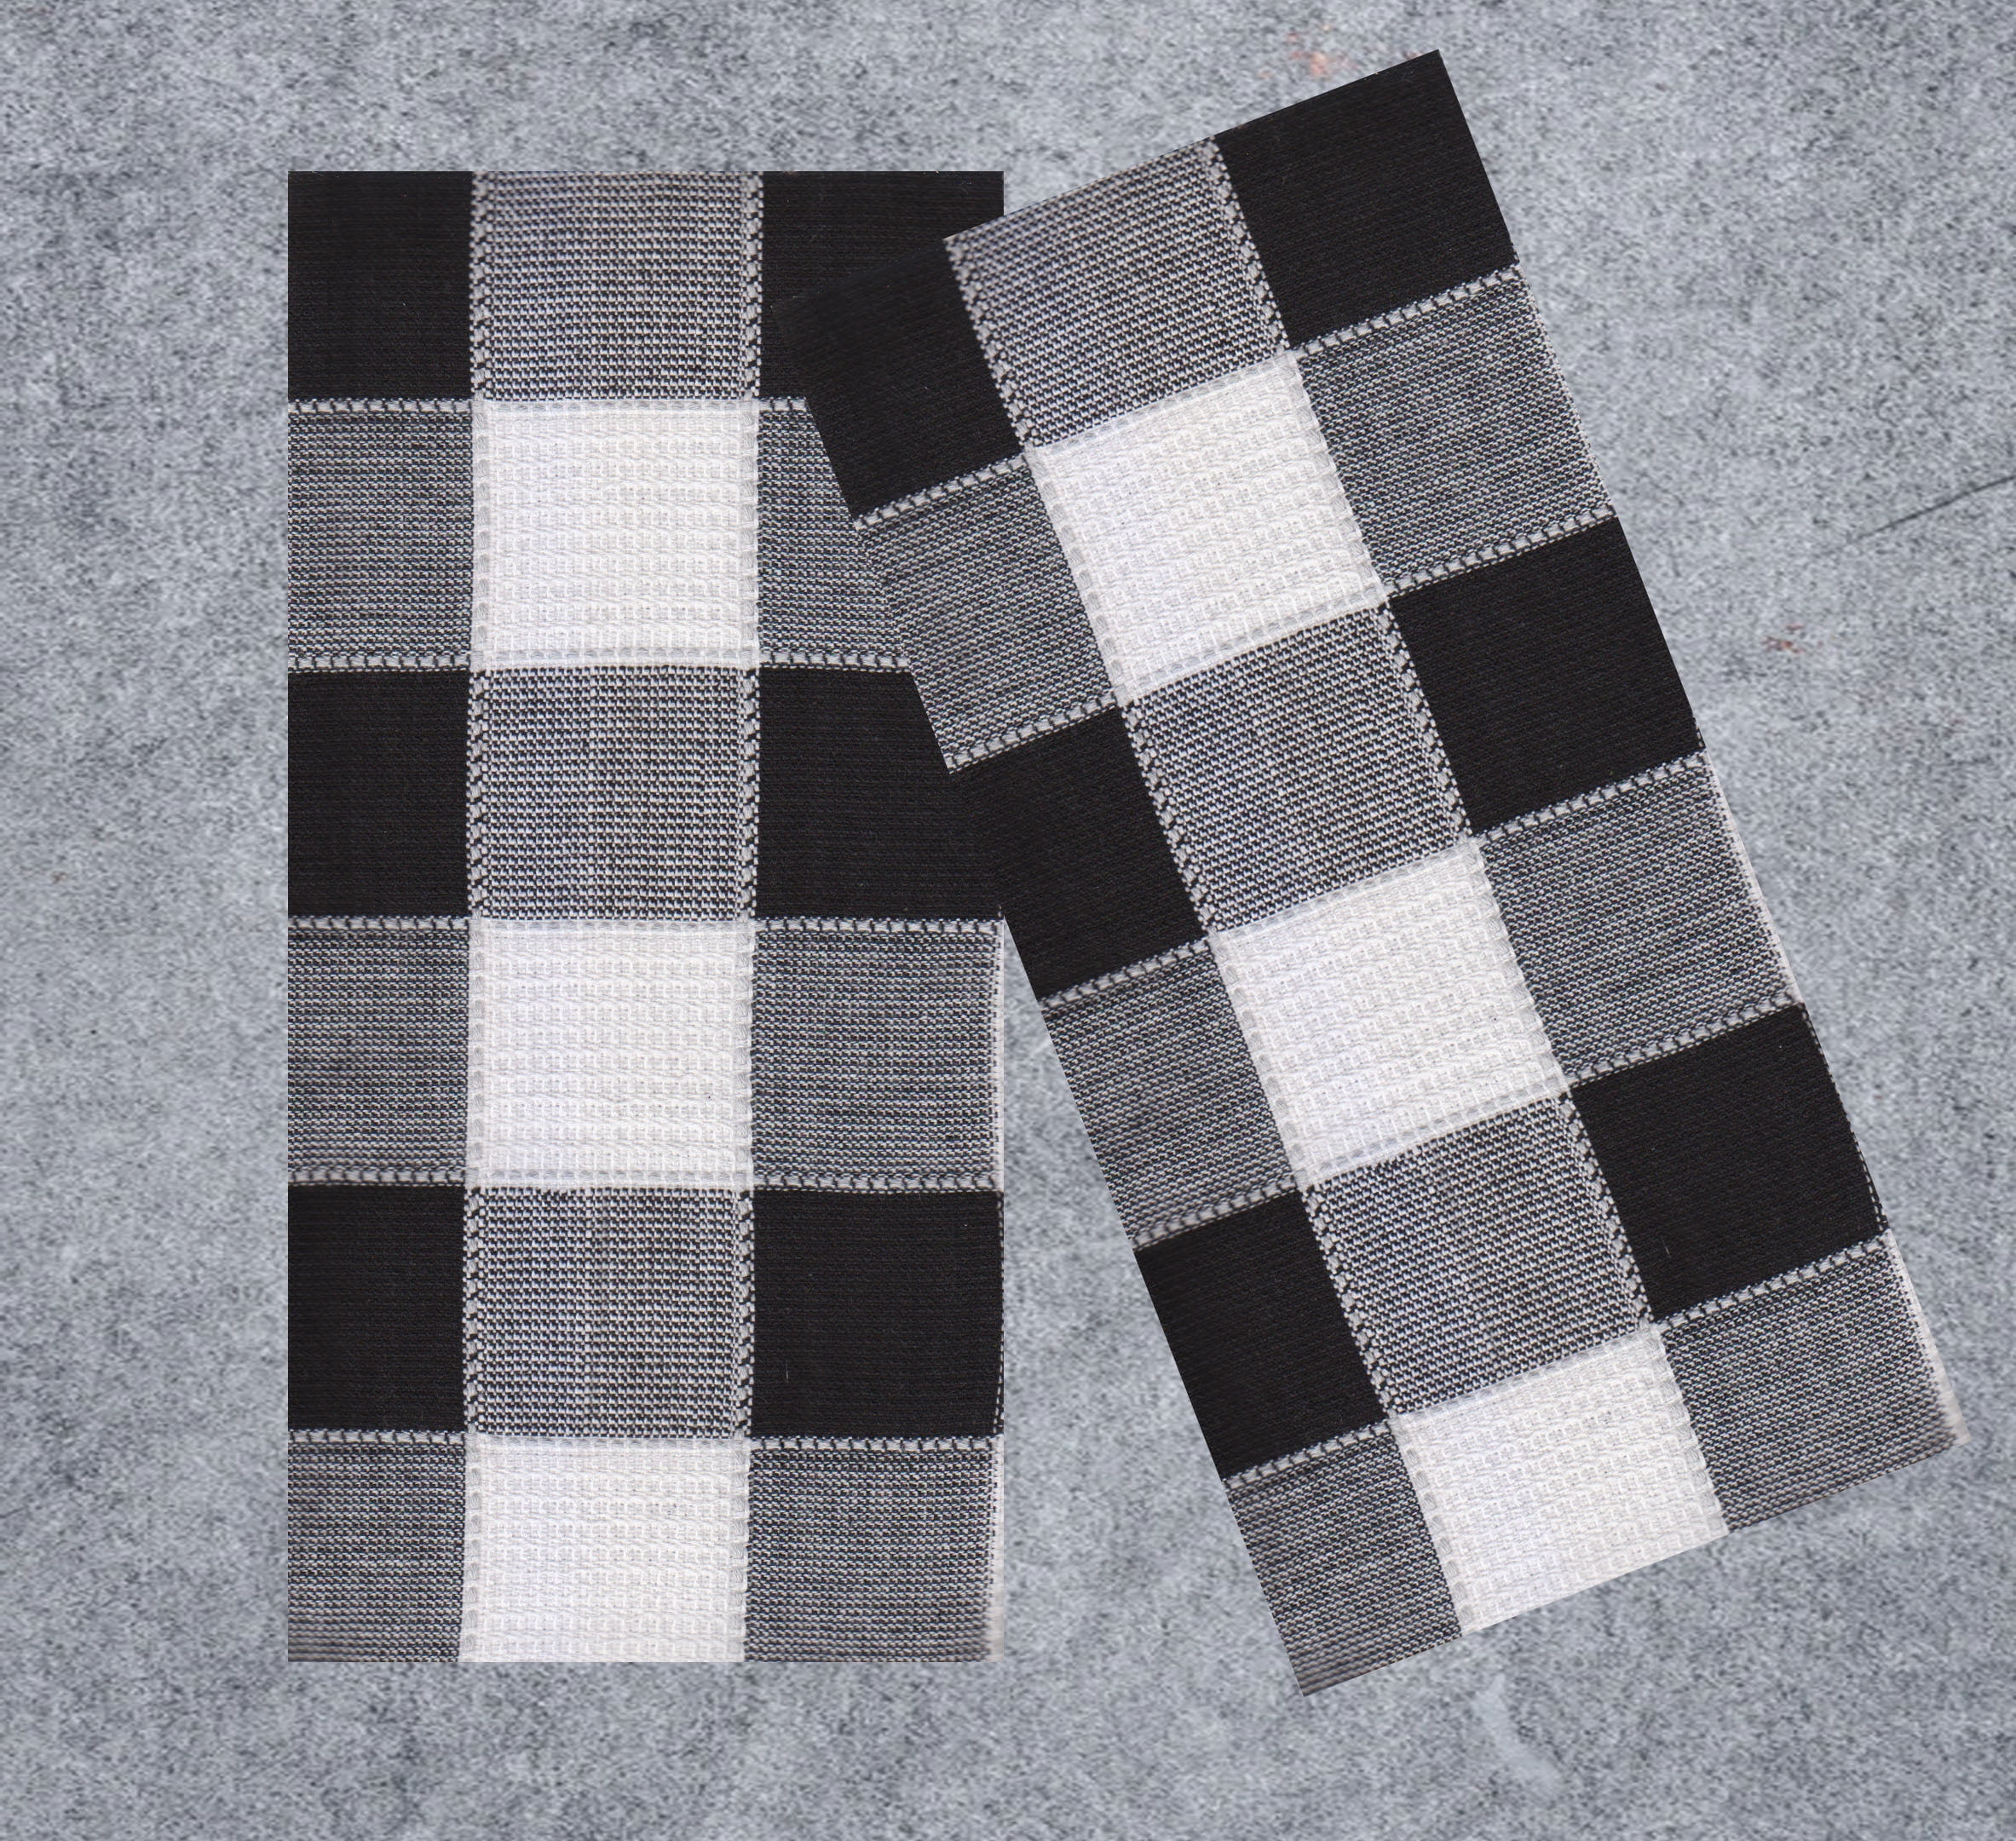 fillURbasket Buffalo Plaid Black Kitchen Towels and Dishcloths Set Check  Dish Towels with Dishcloths for Washing Drying Dishes 100% Cotton 15”x 25”  8